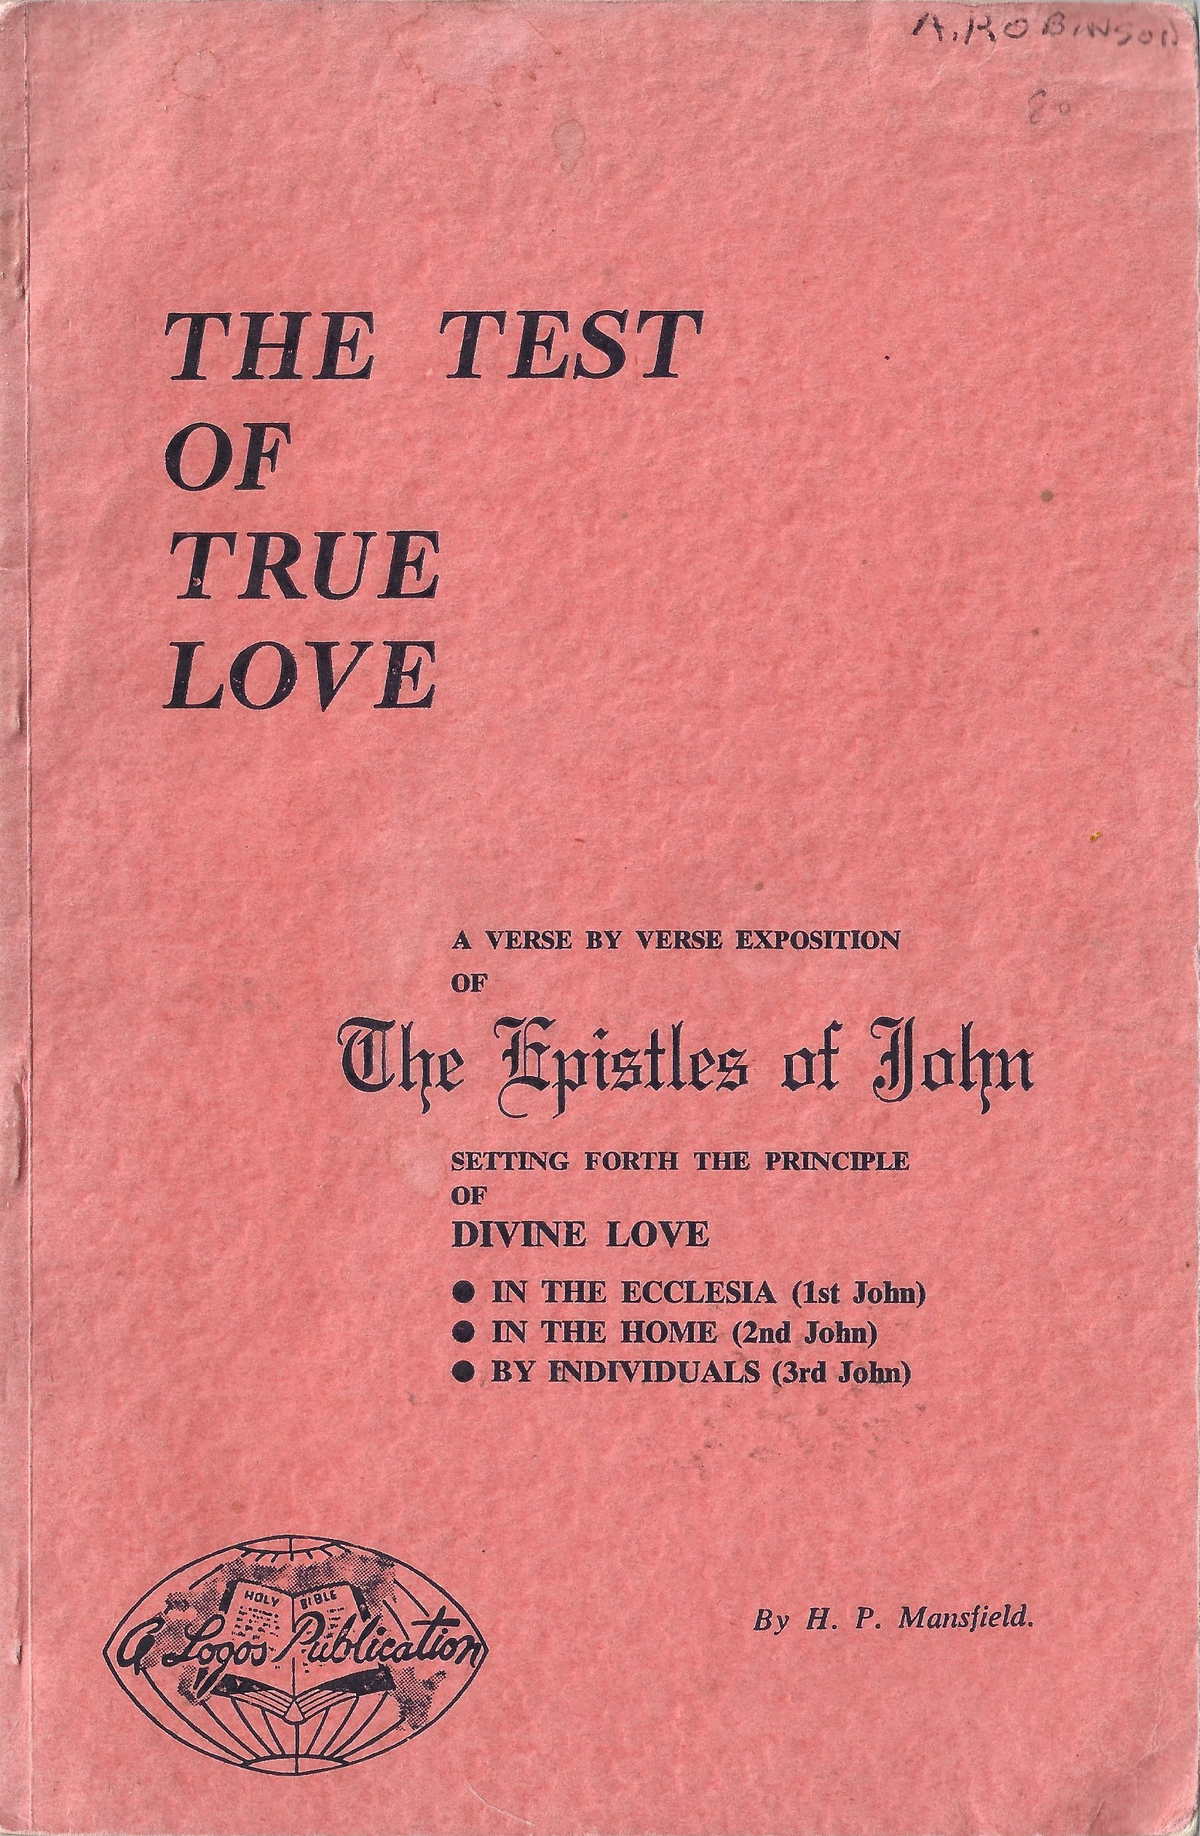 The Epistles of John - Used Book